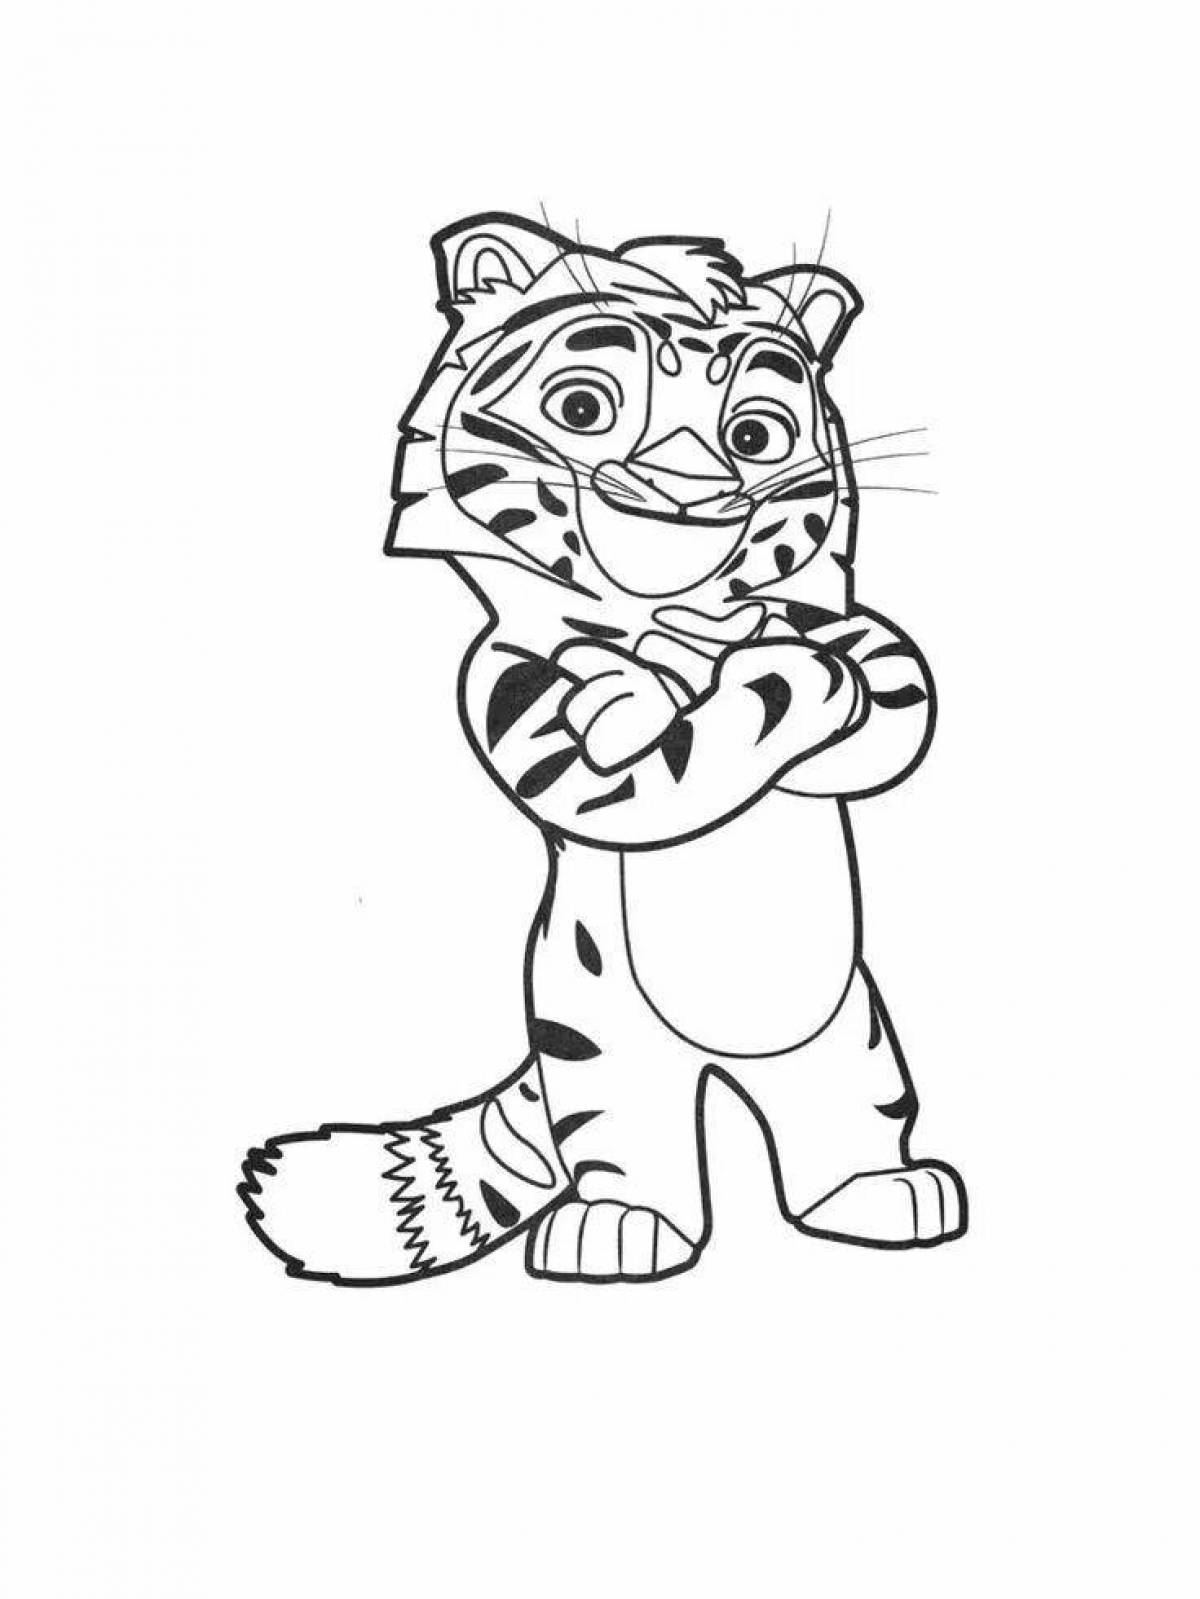 Charming leo coloring book